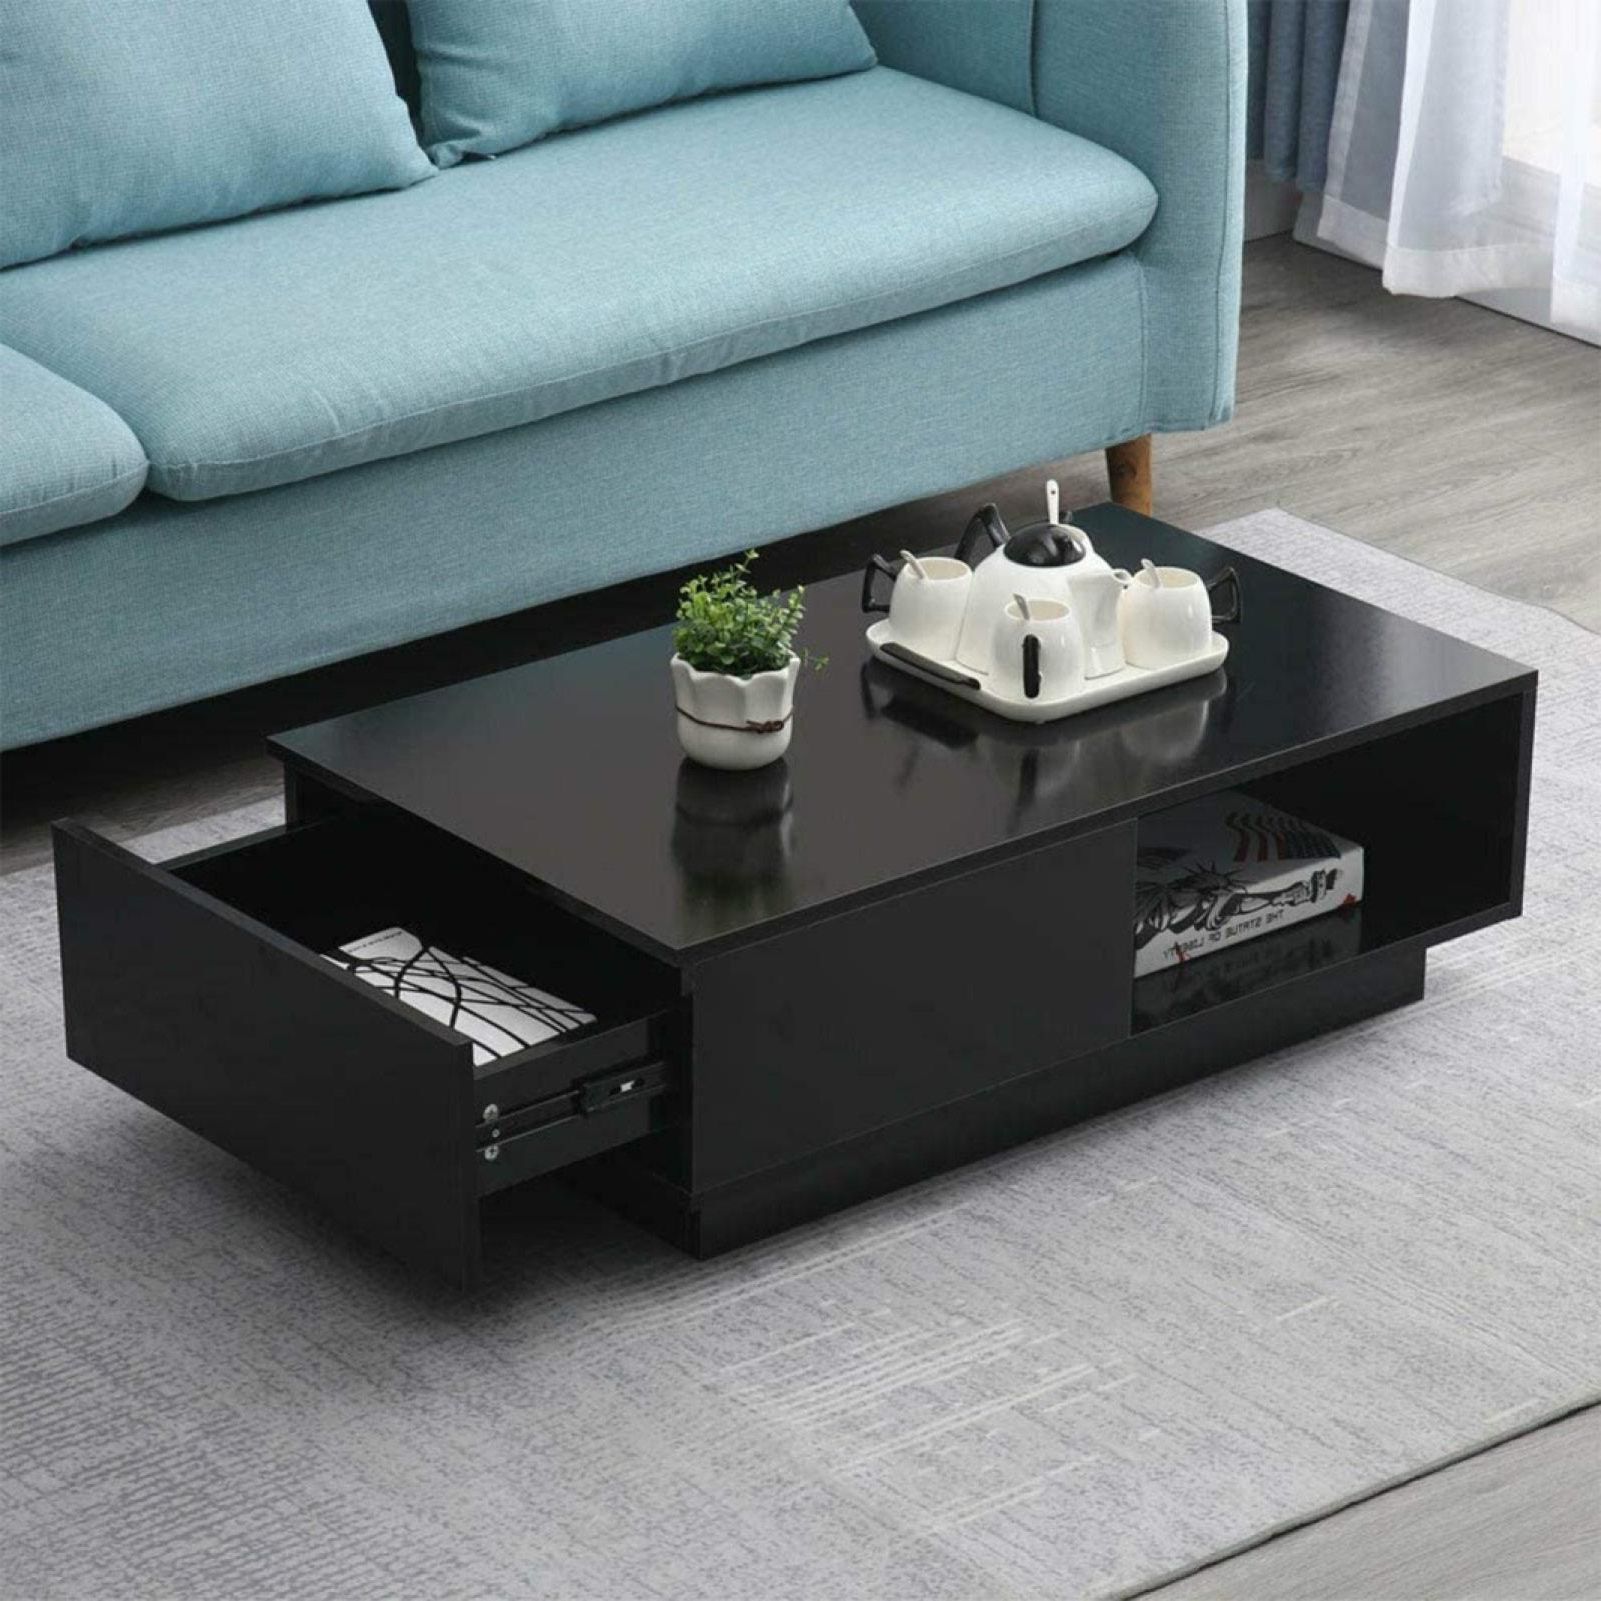 Fashionable High Gloss Coffee Table With Storage Drawers Rgb Led Modern Living Room For Square High Gloss Coffee Tables (View 8 of 10)